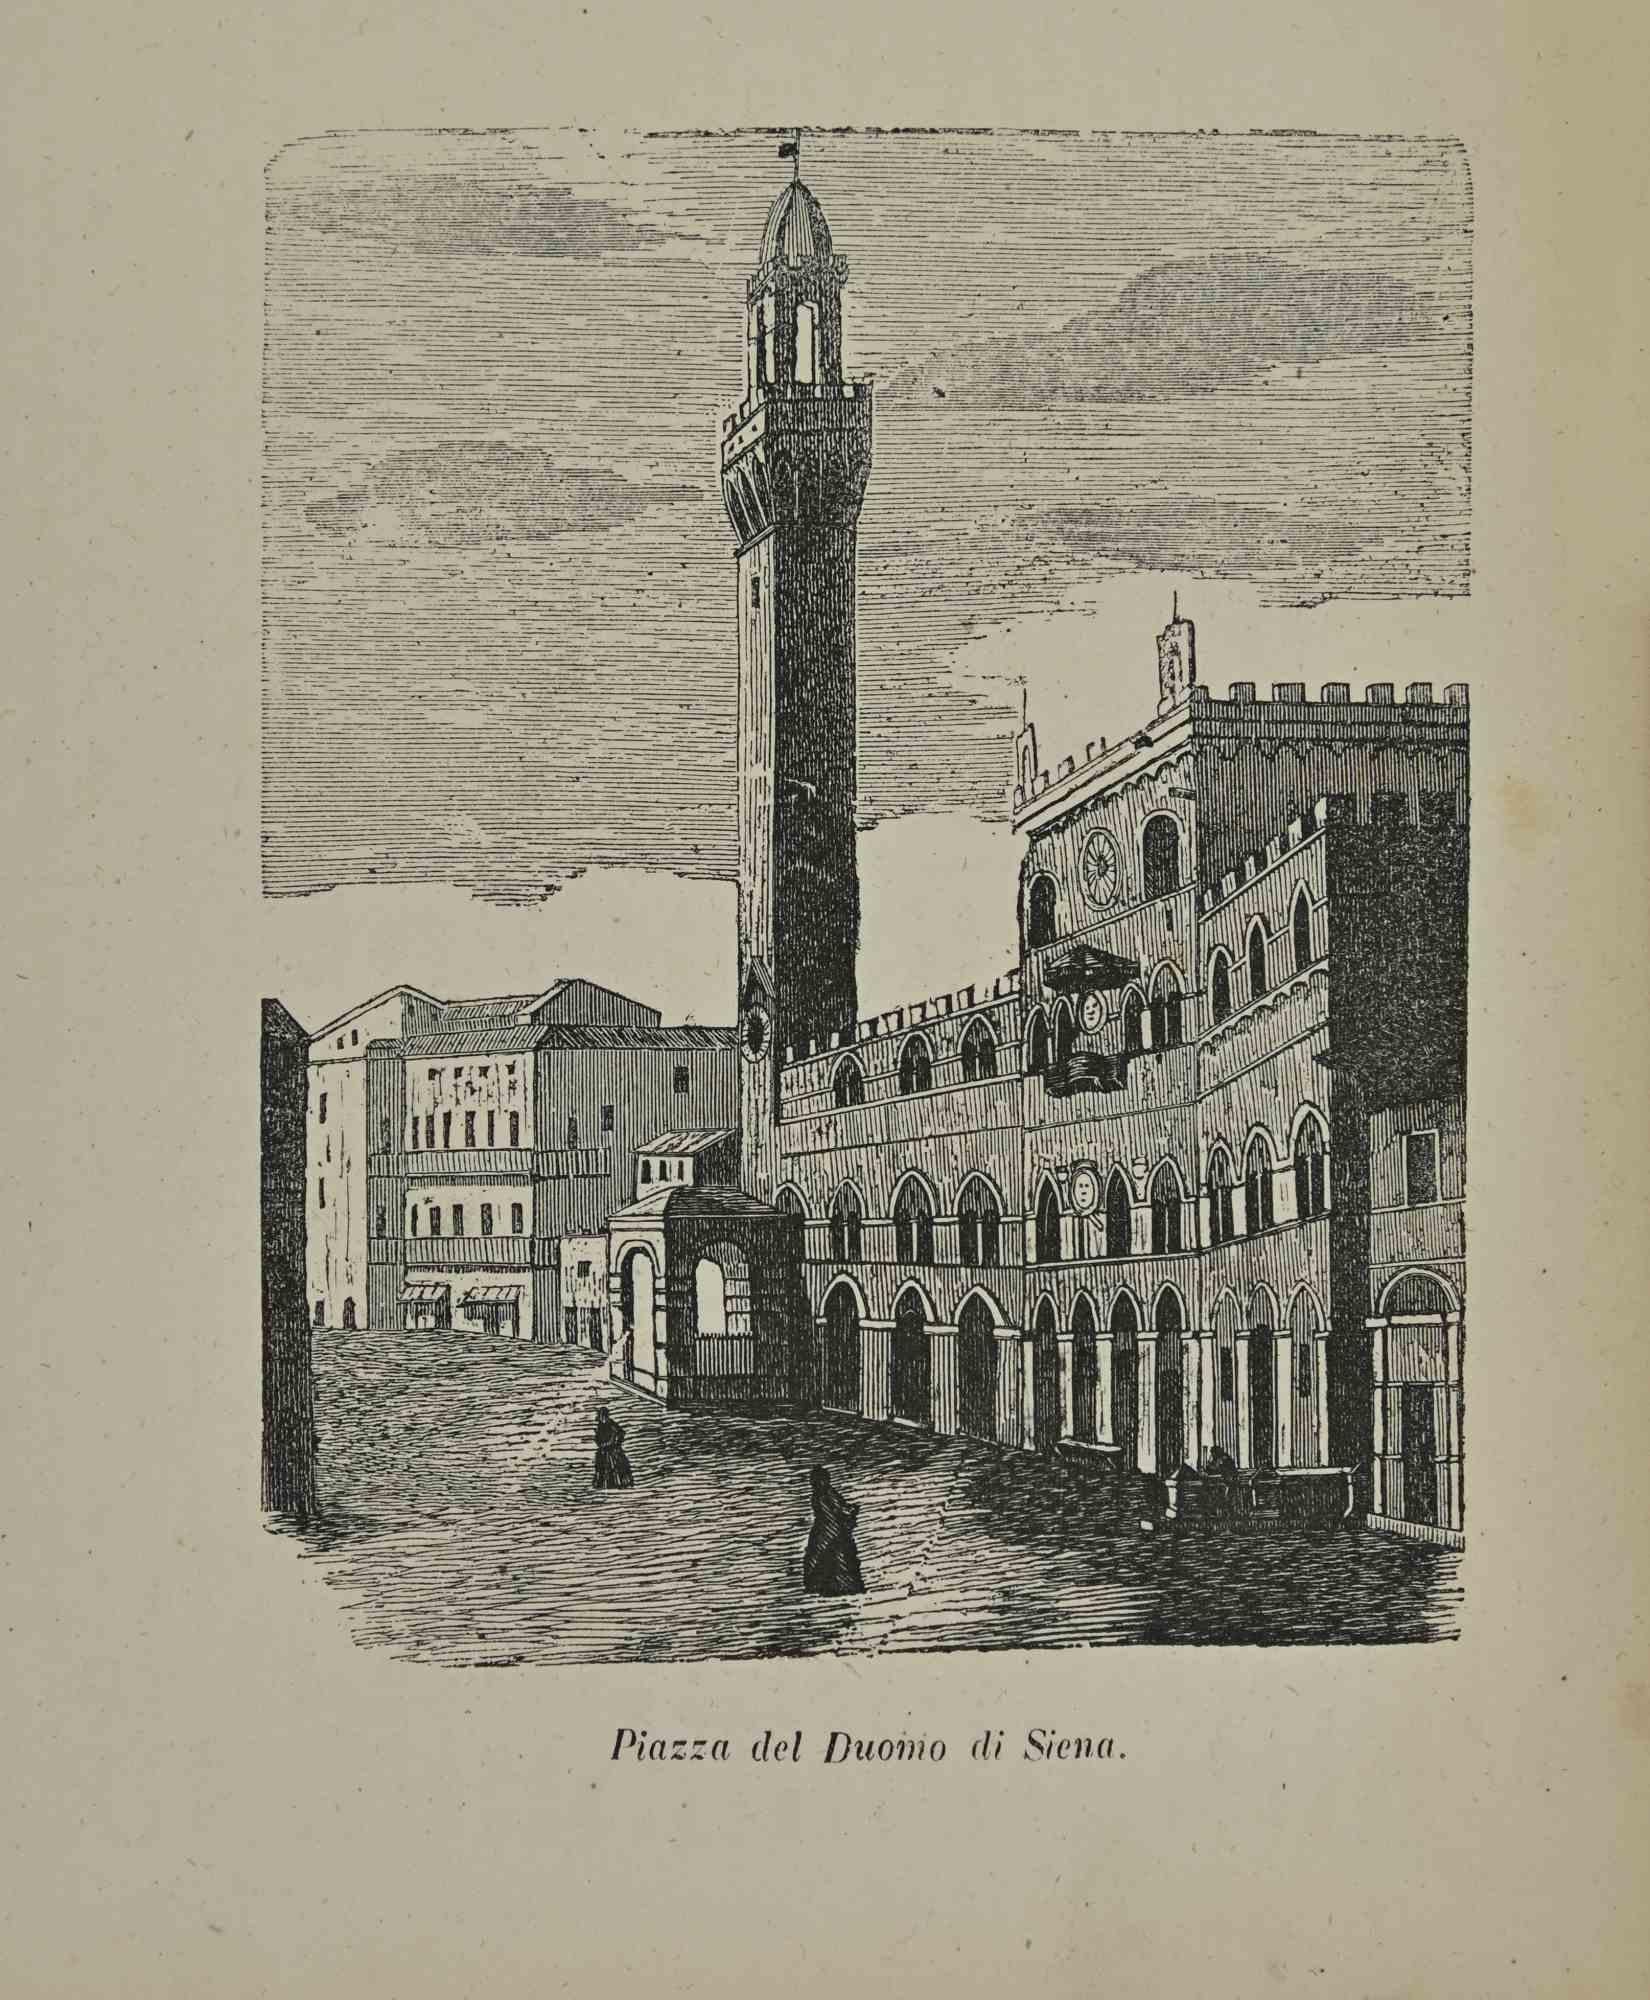 Various Artists Figurative Print - Uses and Customs - Duomo Square in Siena - Lithograph - 1862